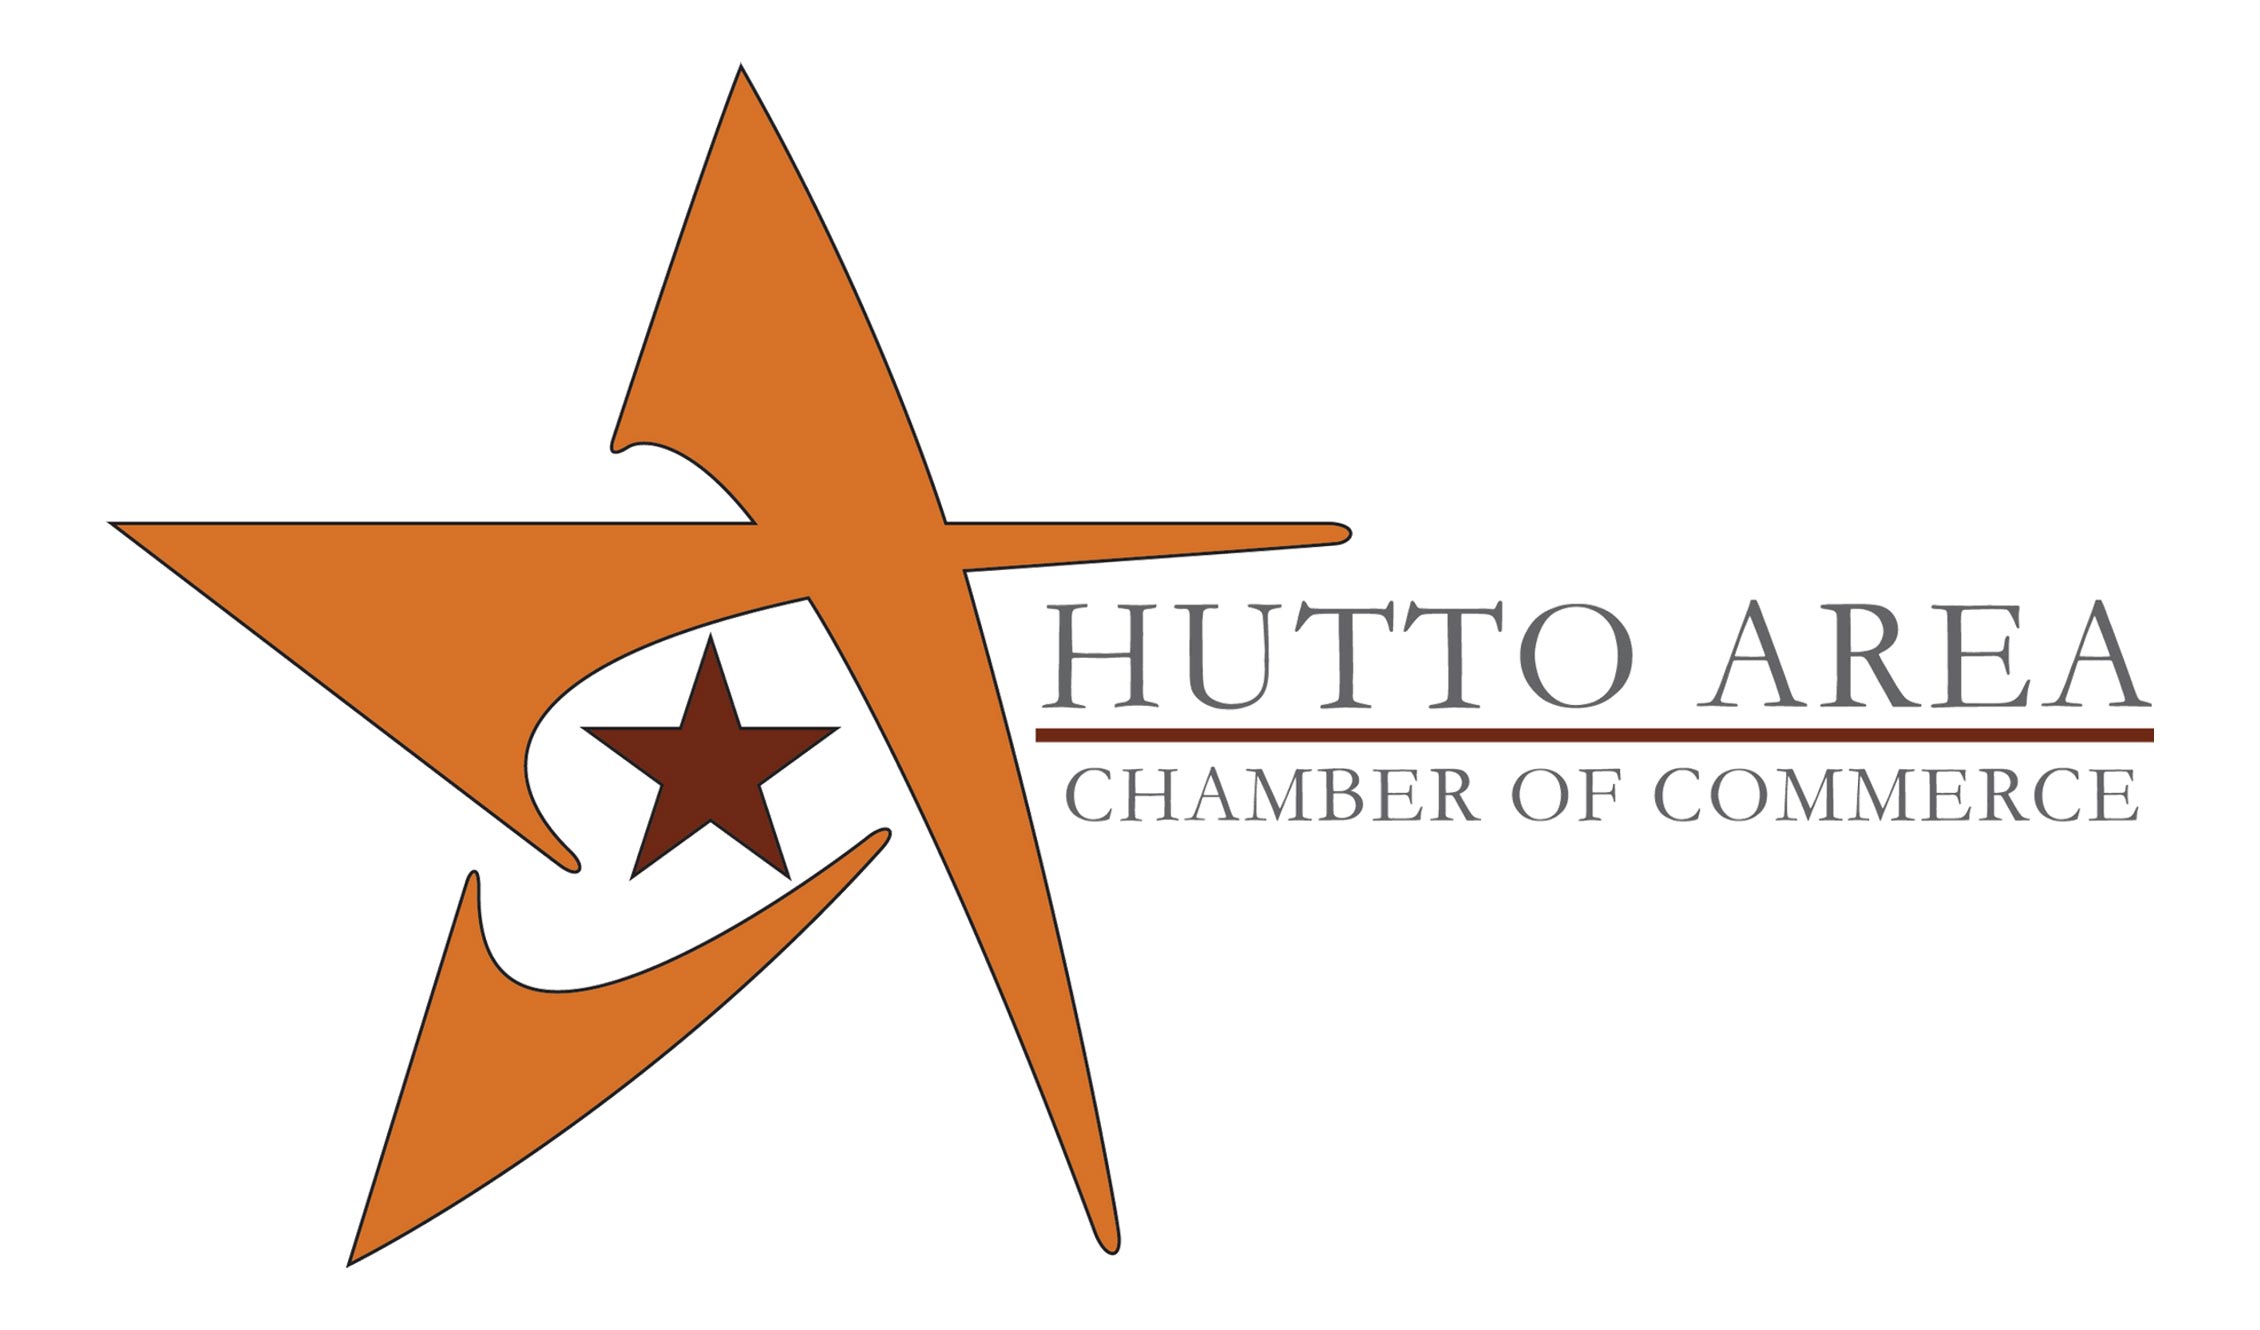 Hutto Area Chamber of Commerce